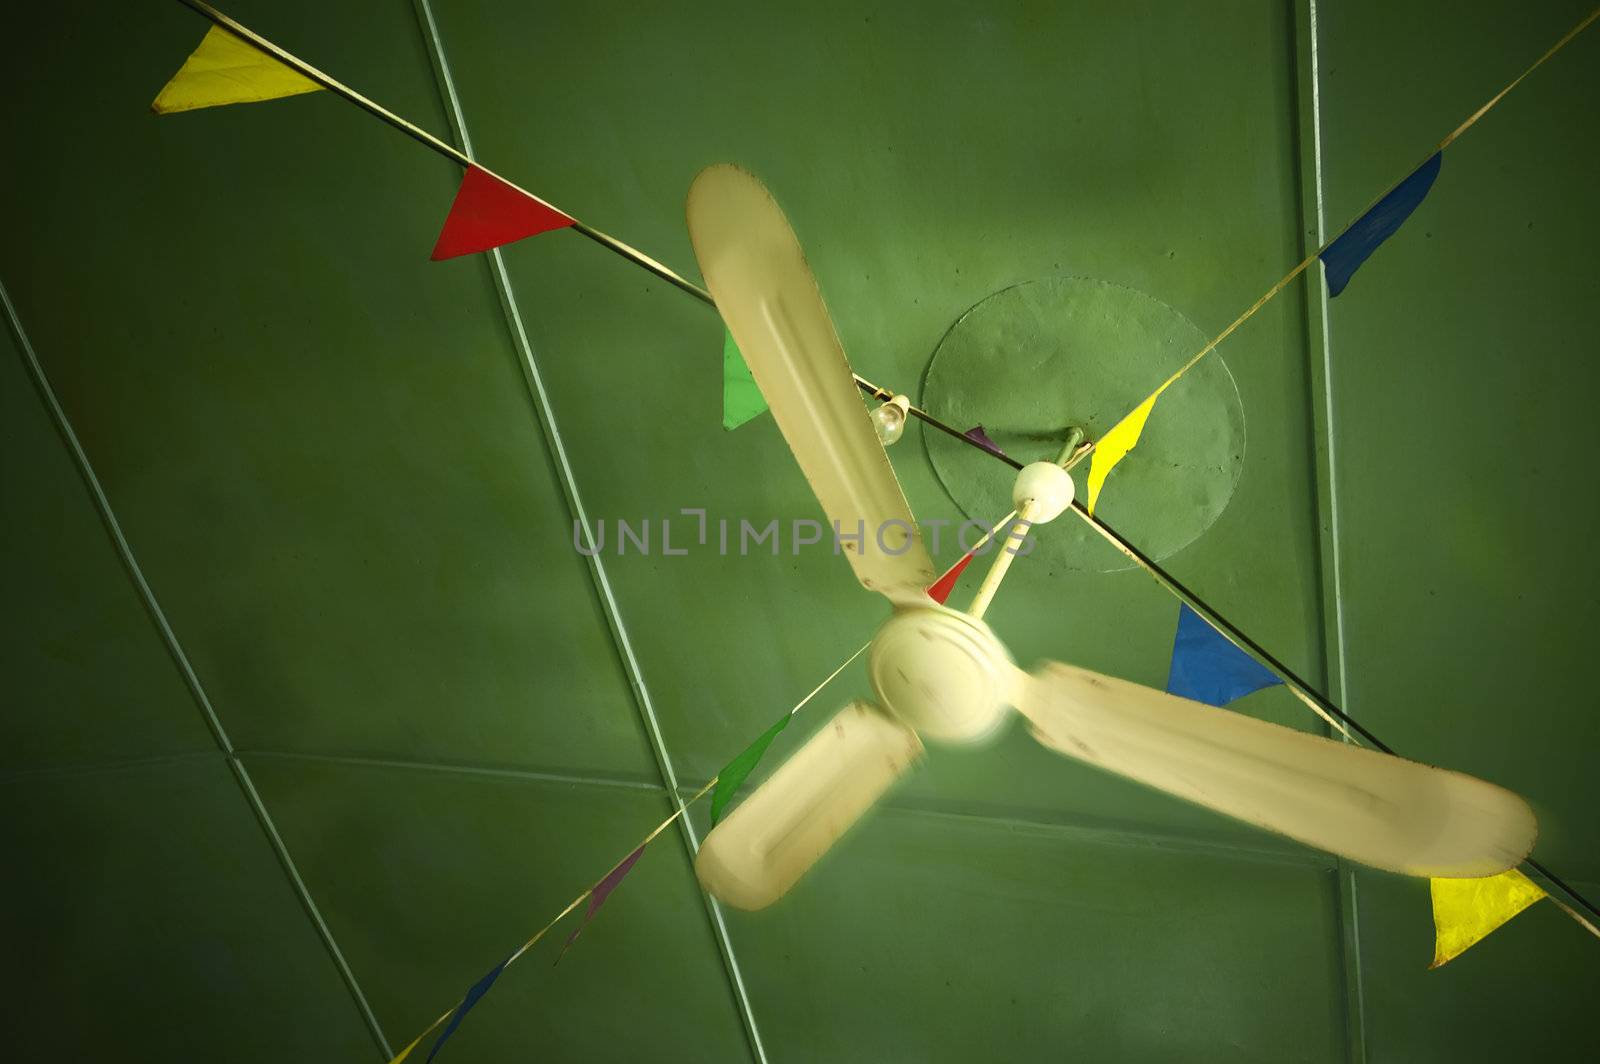 Old ceiling fan spinning in a cafe ceiling decorated with colorful bunting